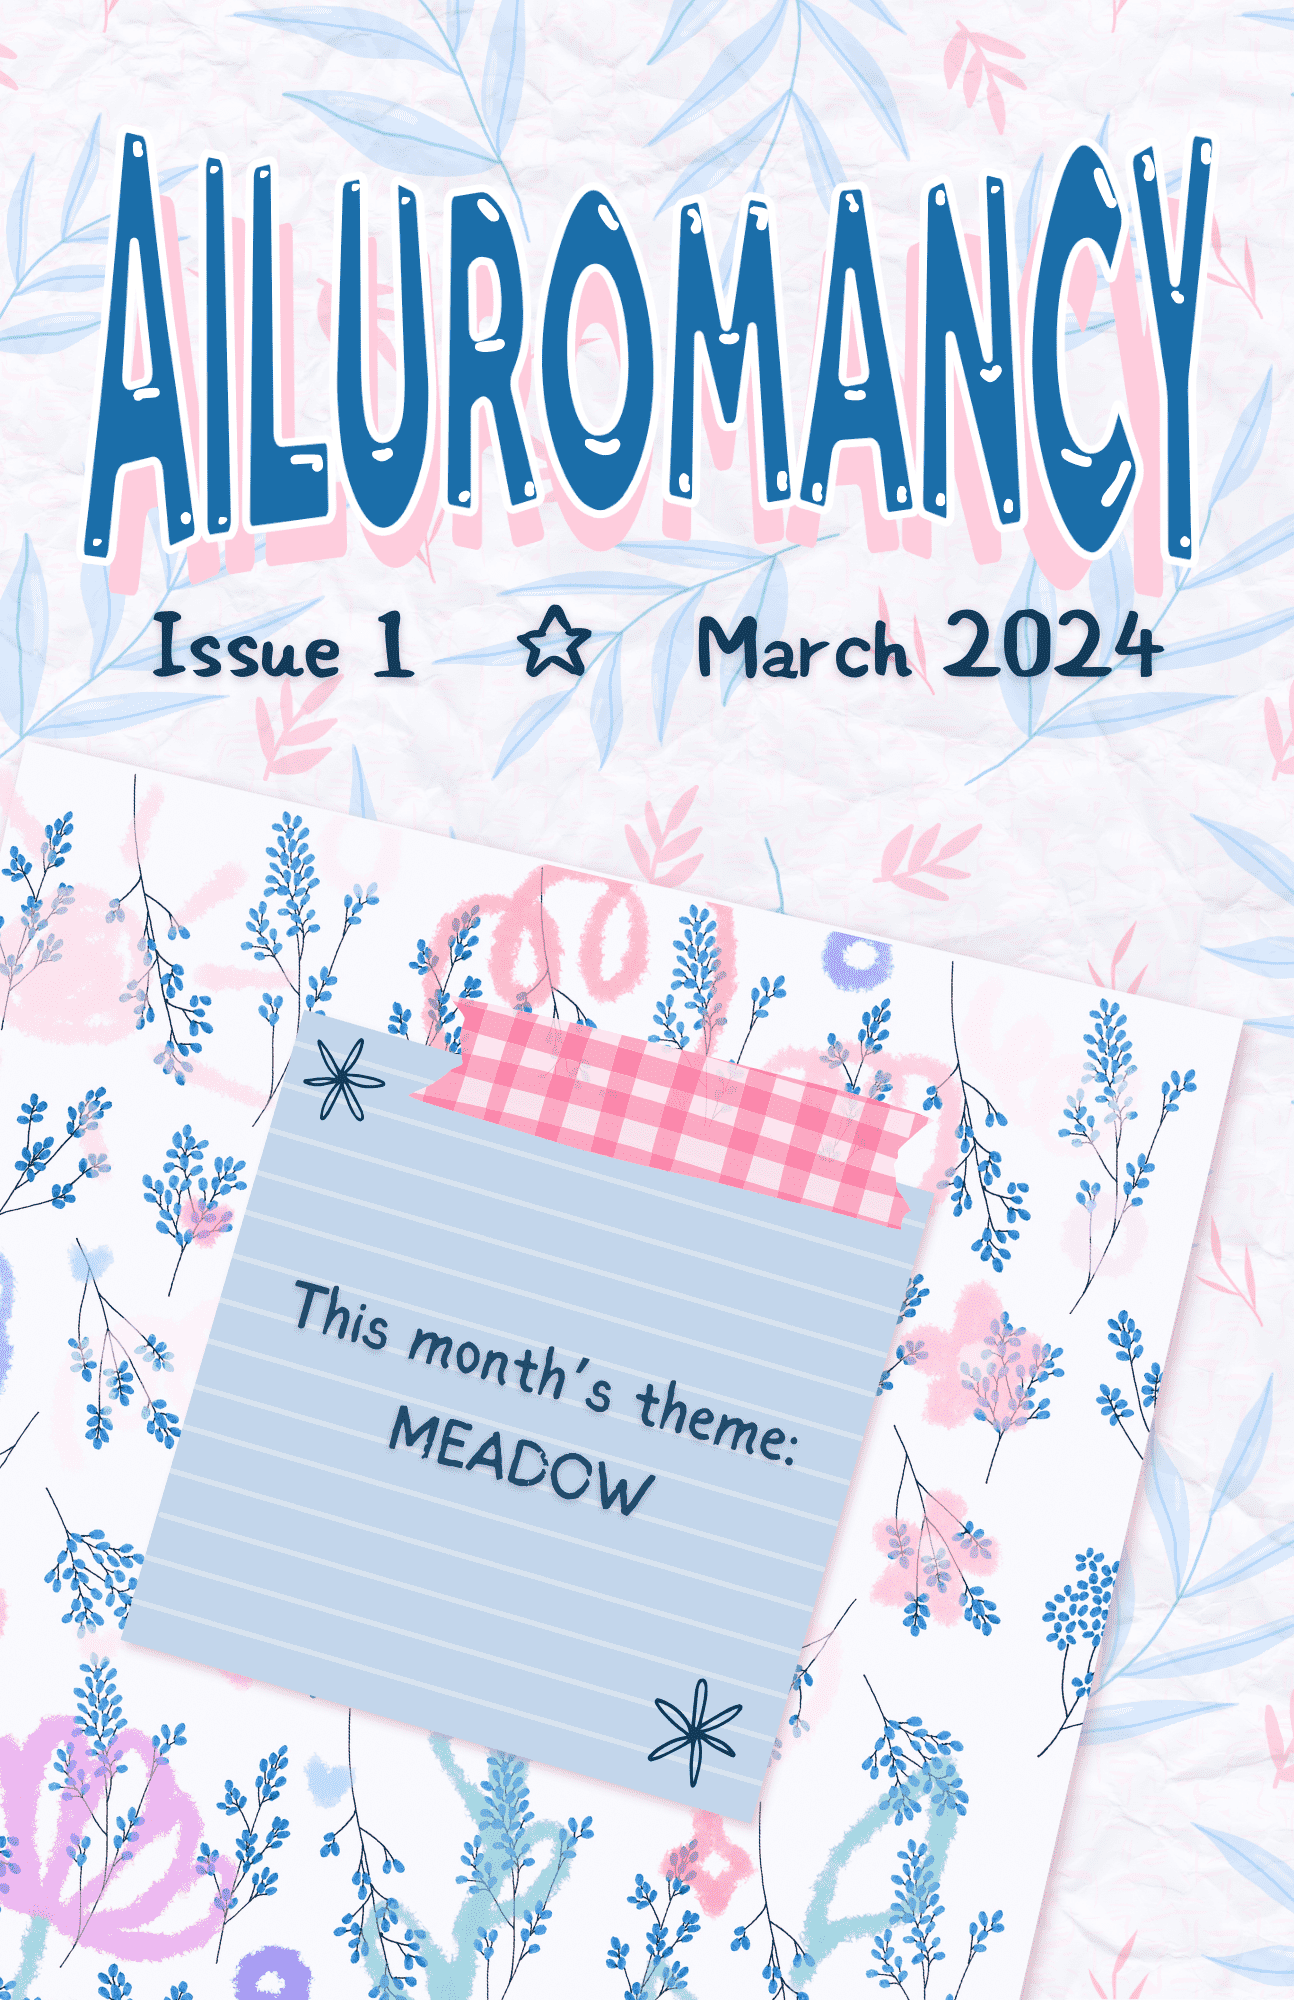 Ailuromancy Issue 1 - March 2024